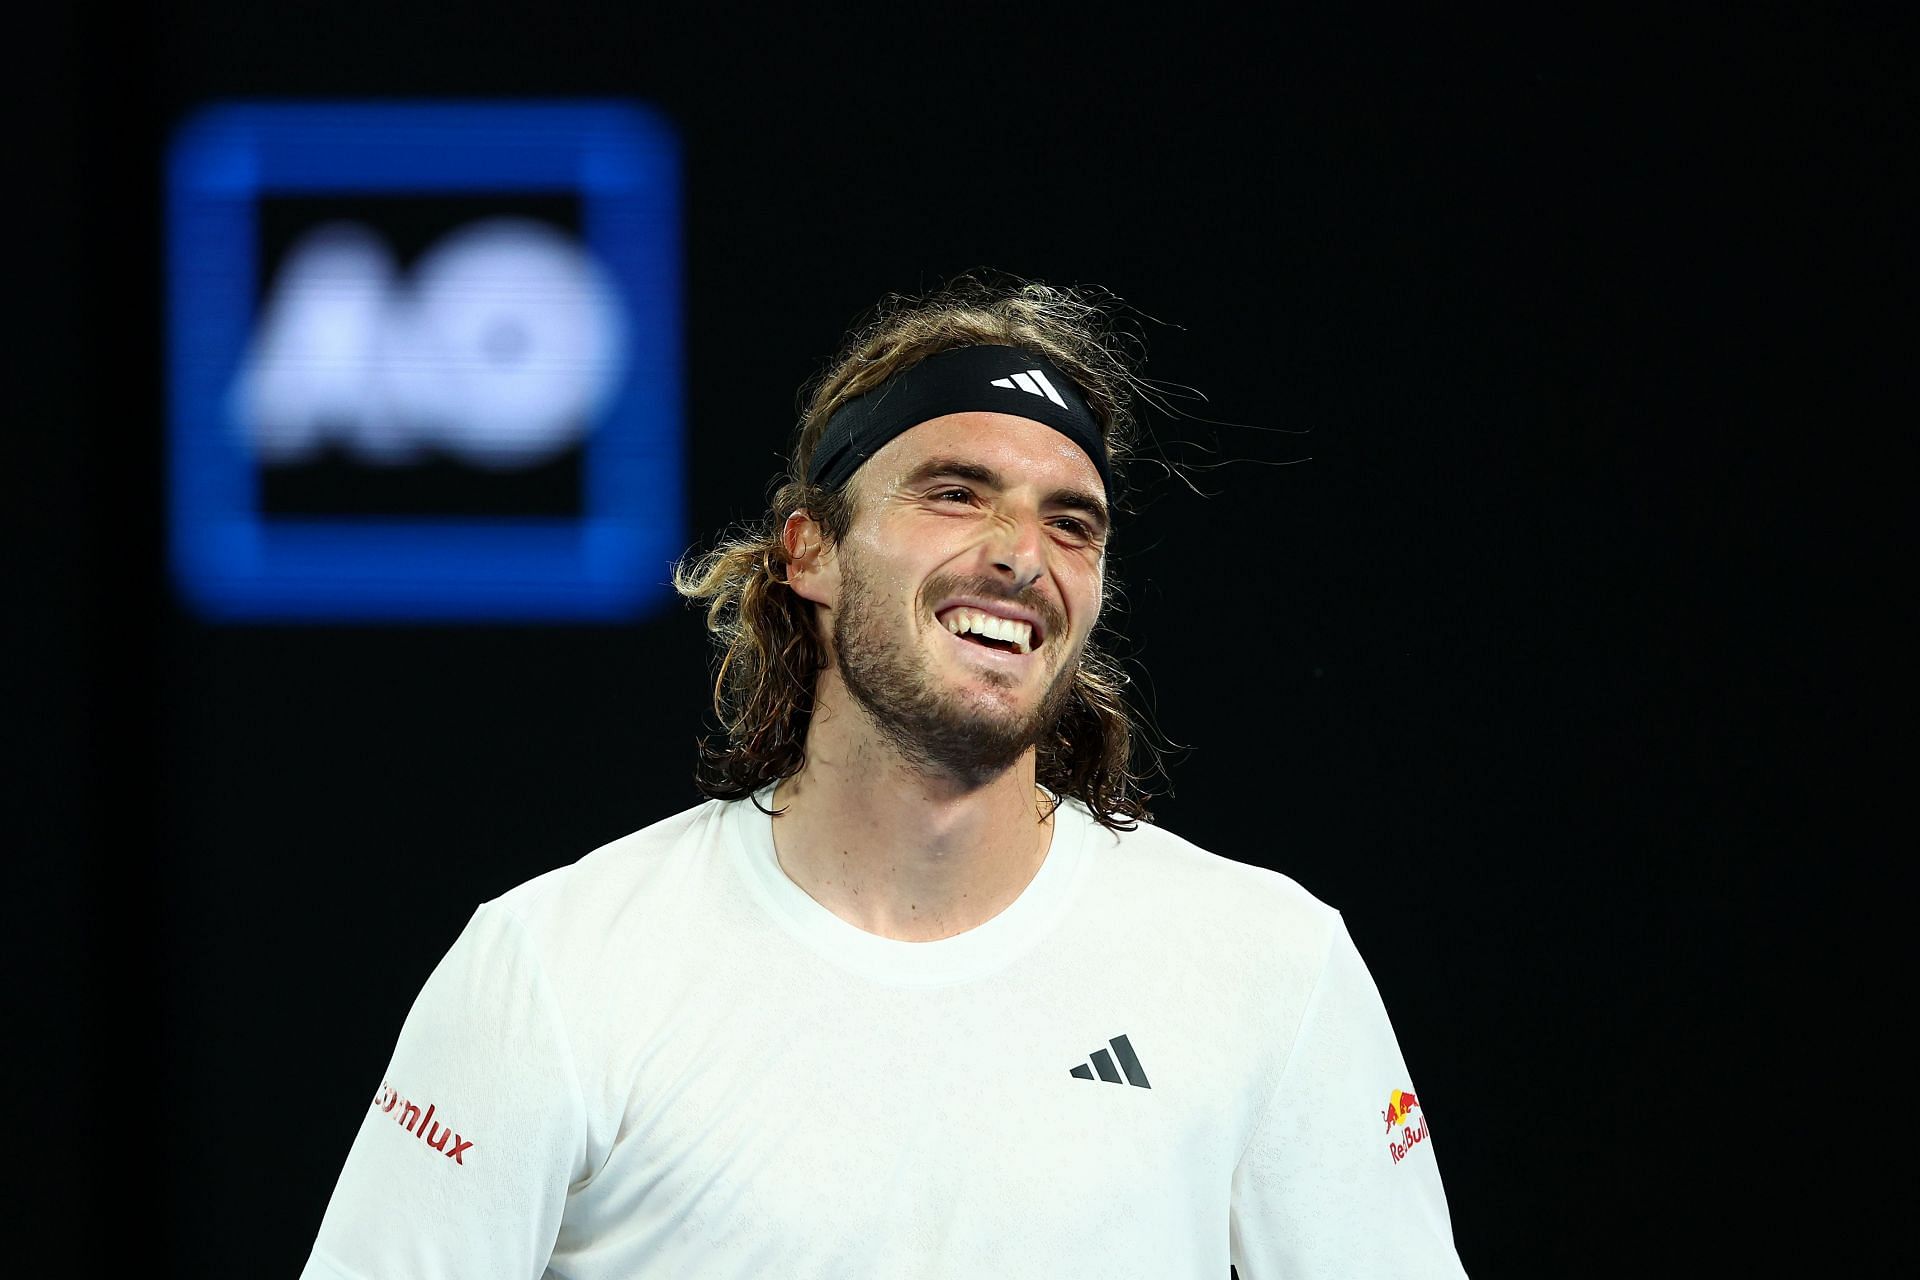 Stefanos Tsitsipas comments on his relationship with Paula Badosa